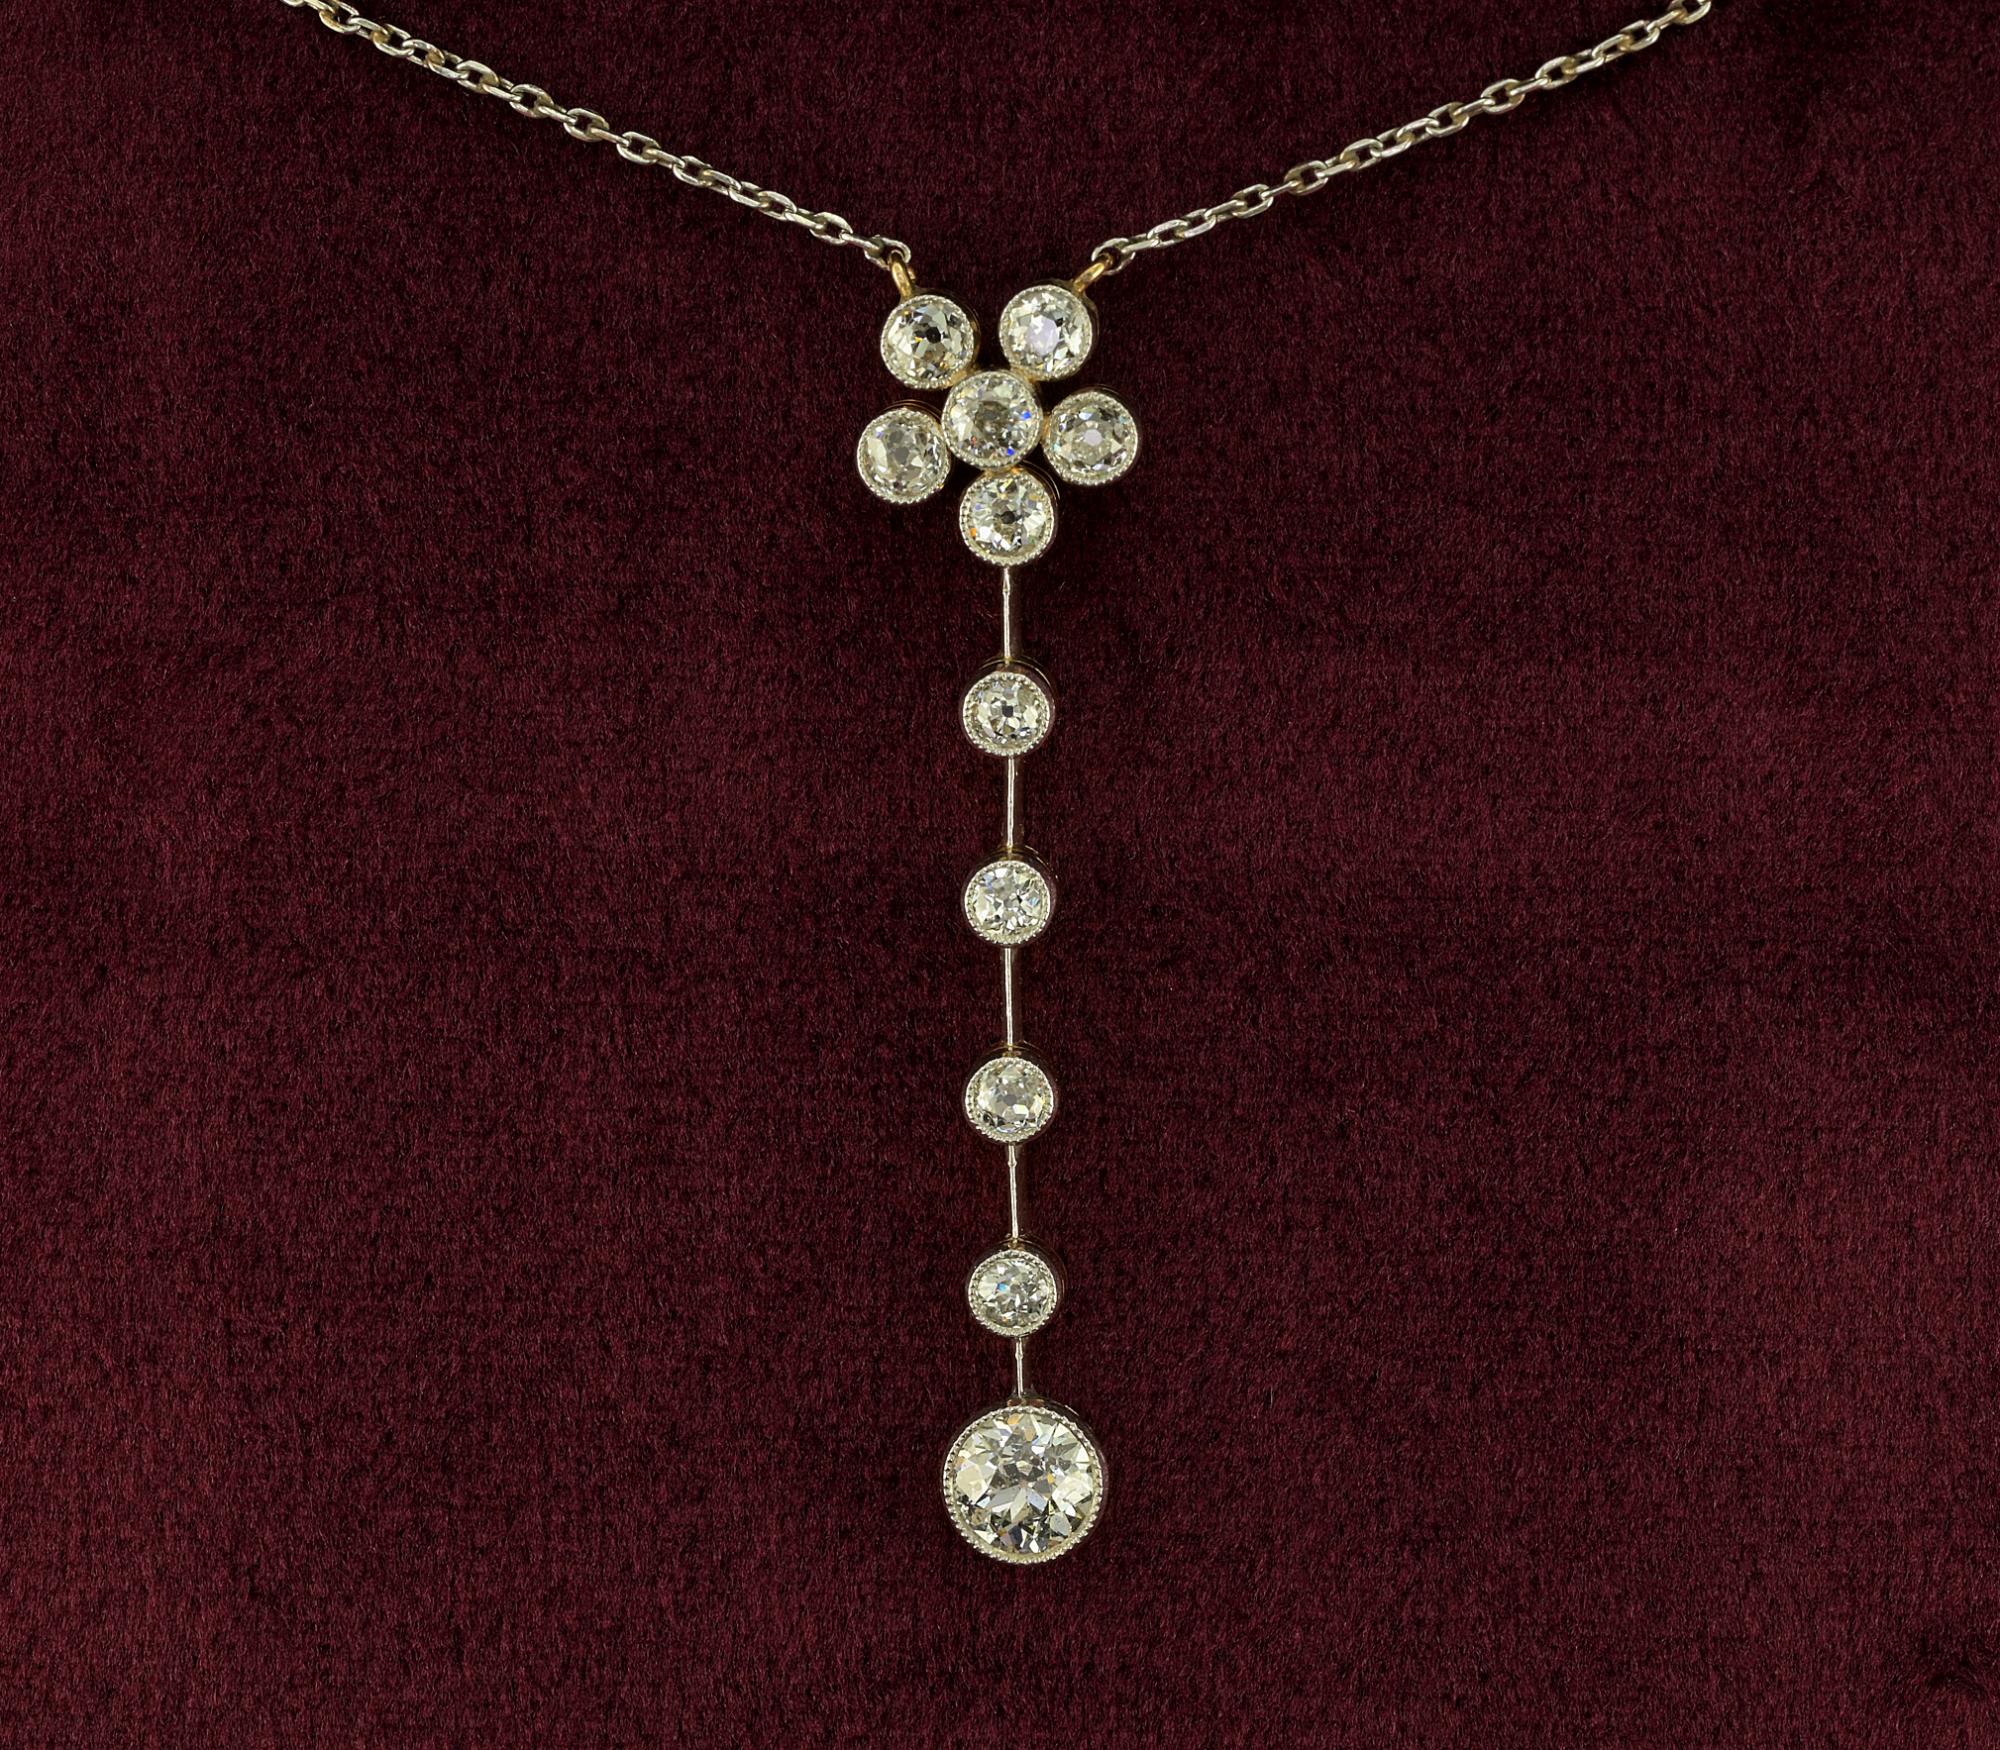 This charming antique Edwardian period necklace is 1905 ca
Exquisitely hand crafted of solid 18 Kt gold topped by Platinum
Consisting in a gorgeous center Daisy shaped Diamond set centre piece, with a line of Diamonds dropping down terminating with